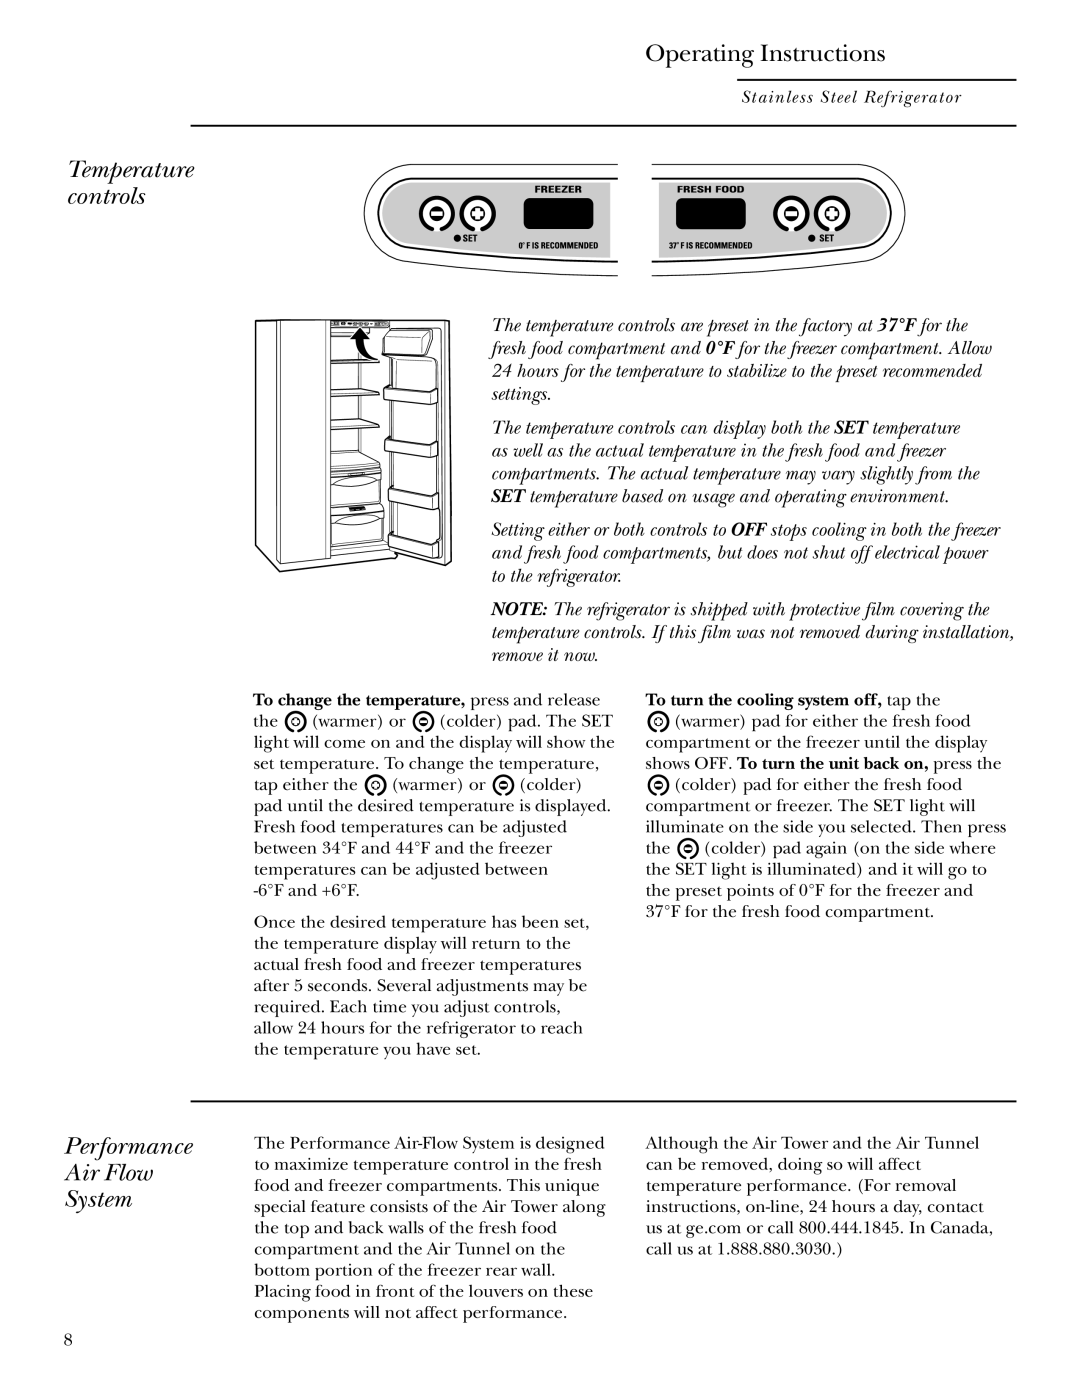 GE Monogram Refrigerator owner manual Operating Instructions, Temperature controls, Performance Air Flow System 